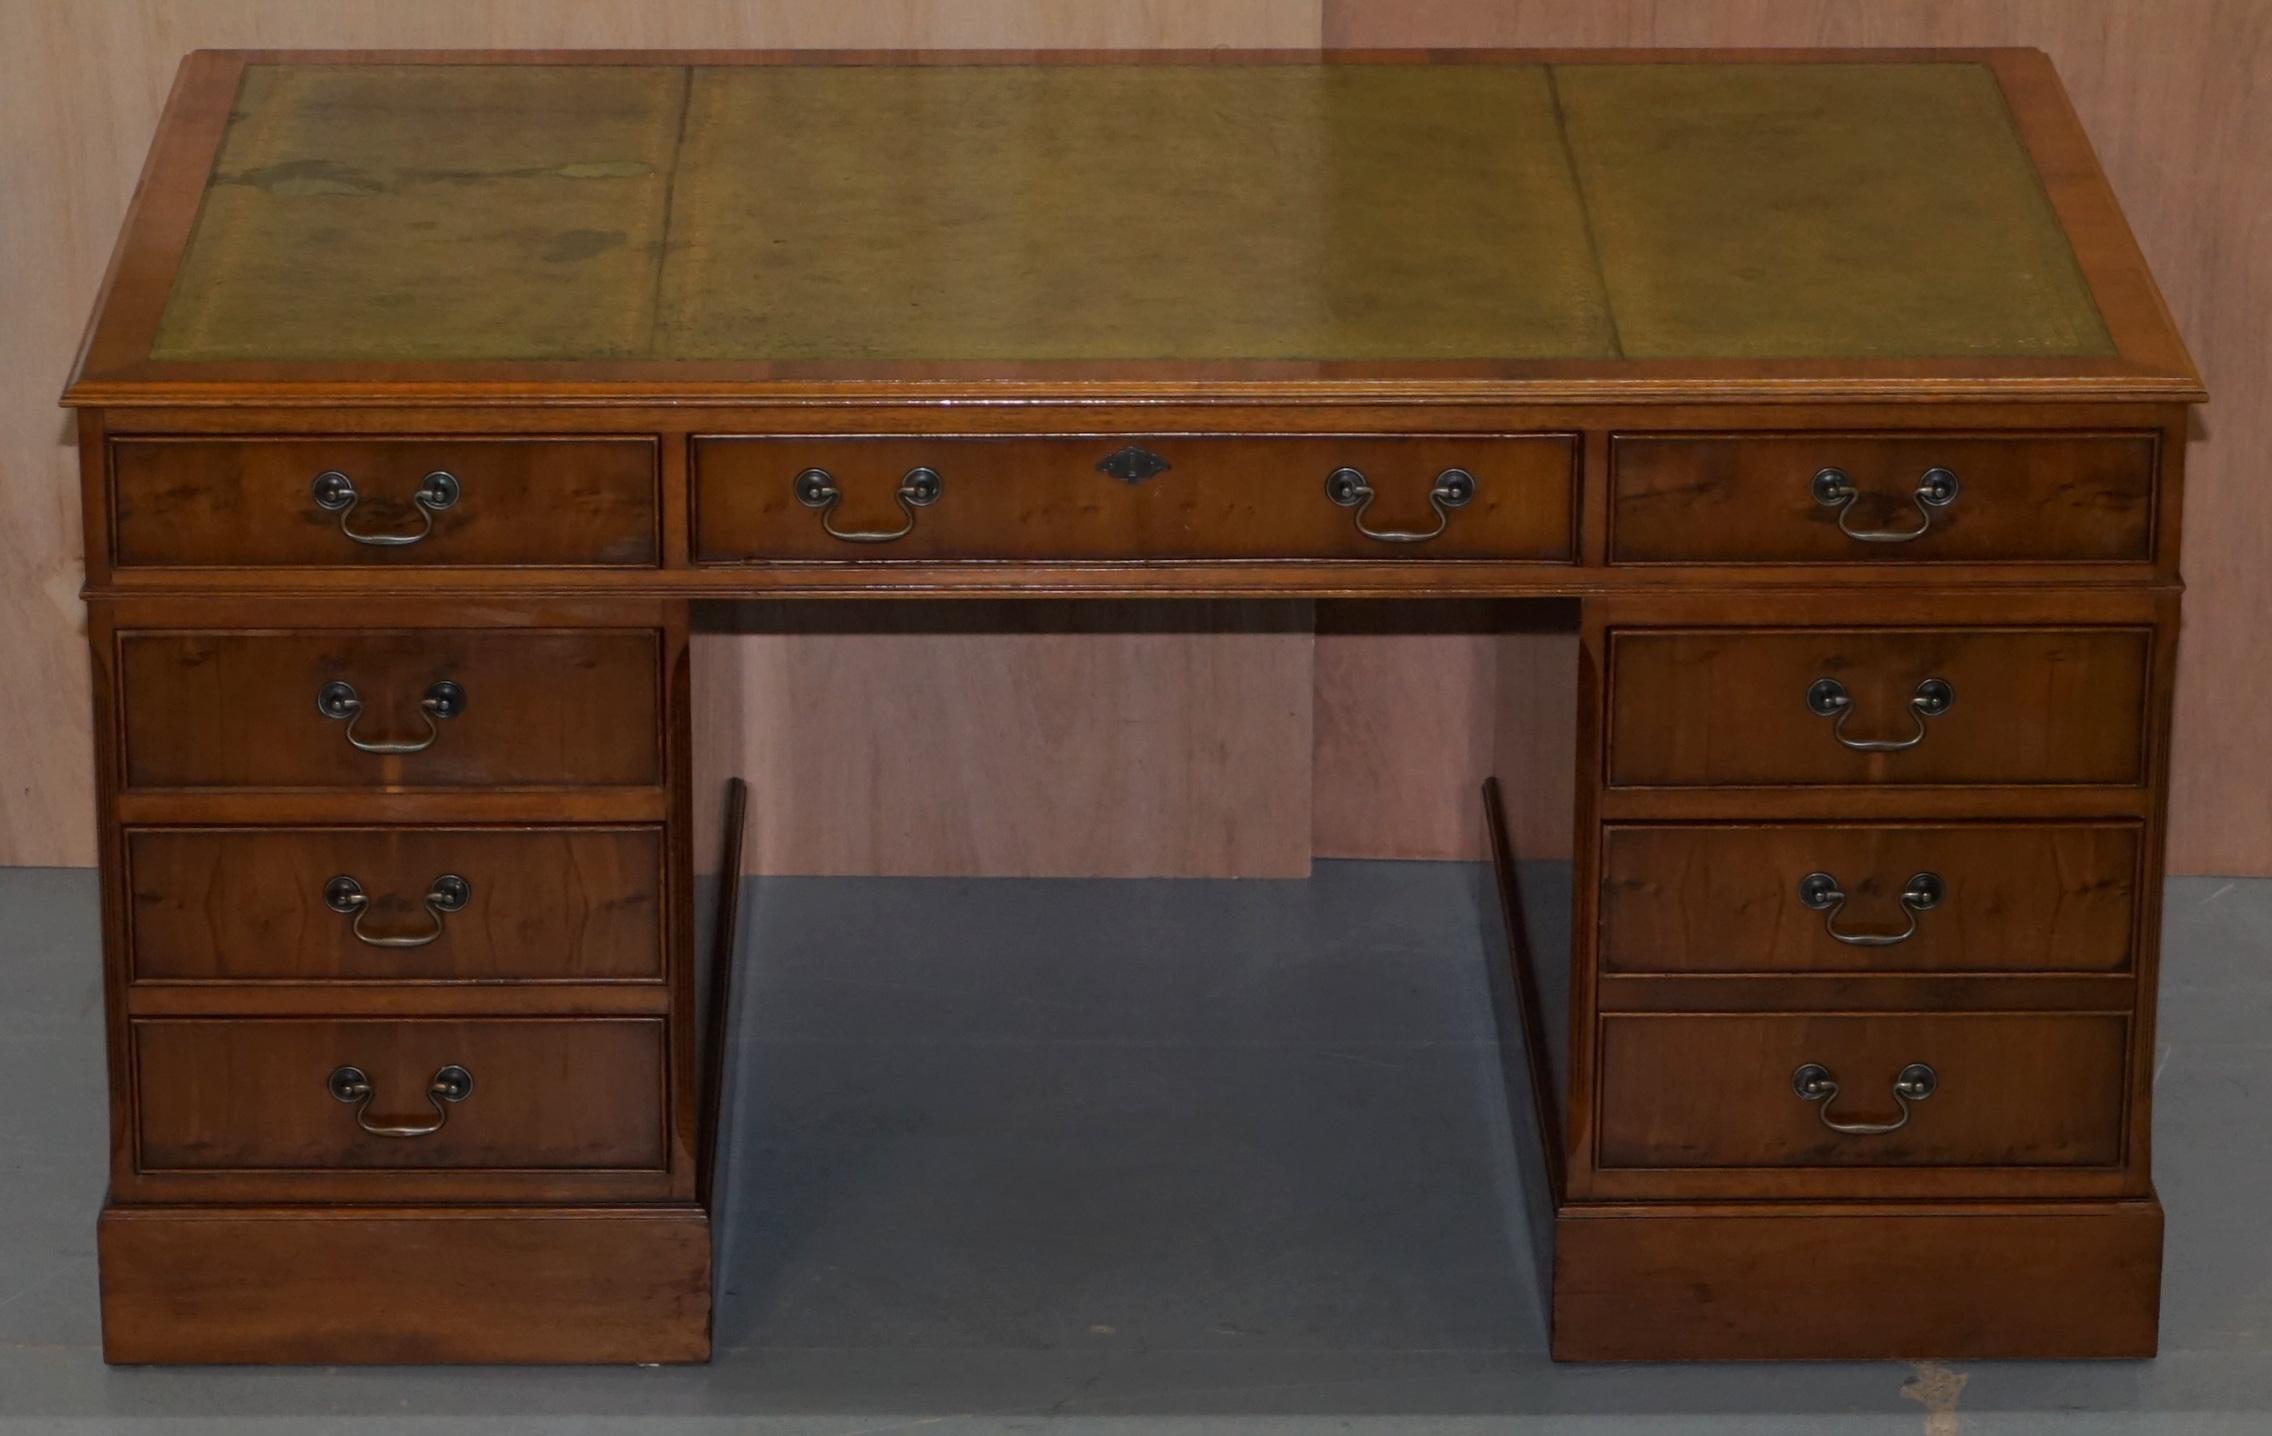 We are delighted to offer for sale this vintage twin pedestal partner desk finished in luxury burl yew wood with a green leather gold leaf embossed top

A very good looking and well made desk with a lovely timber patina, its vintage and used, the